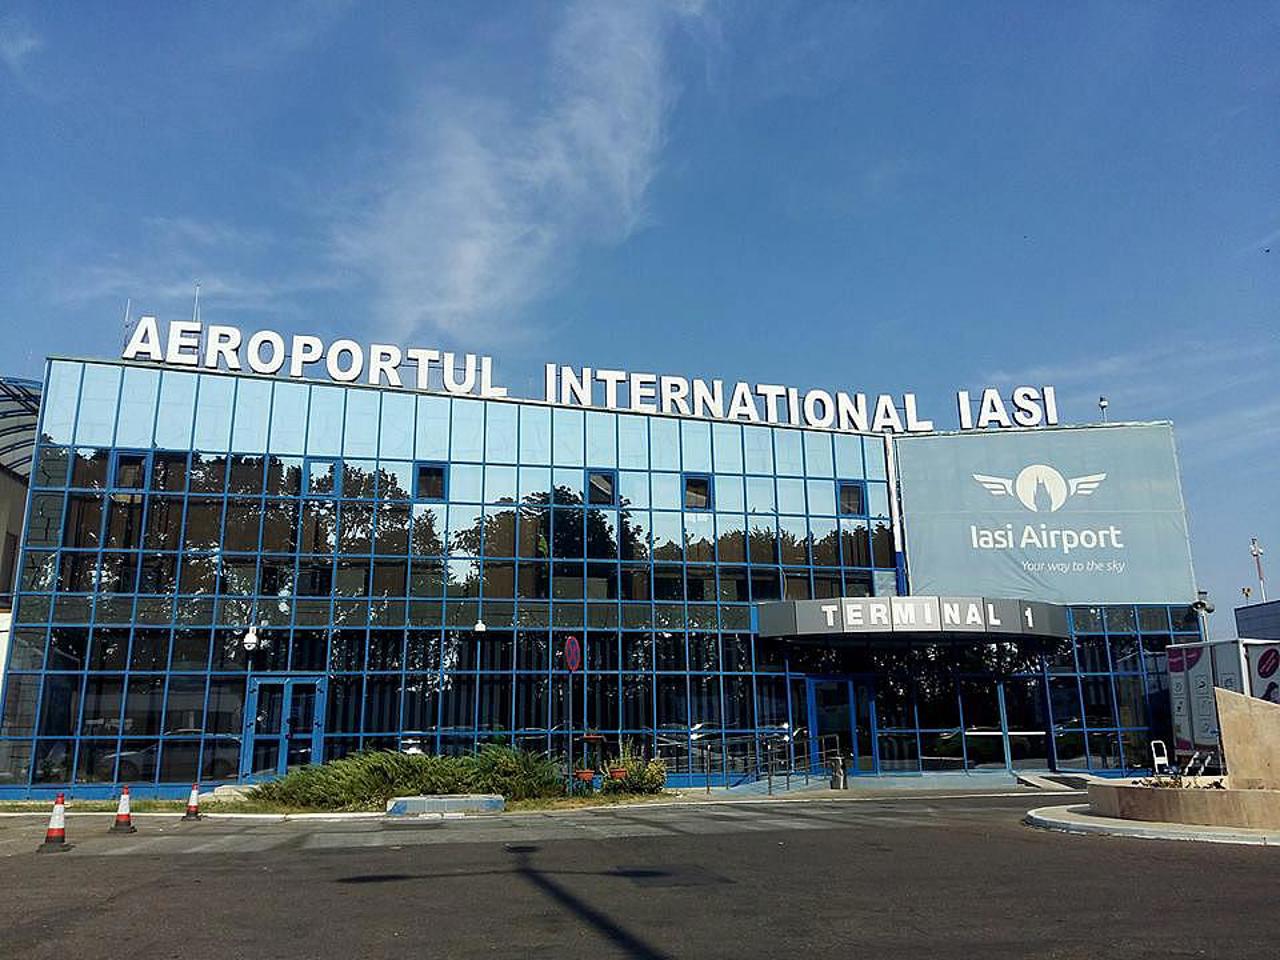 One third of the passengers of Iași International Airport are from the Republic of Moldova